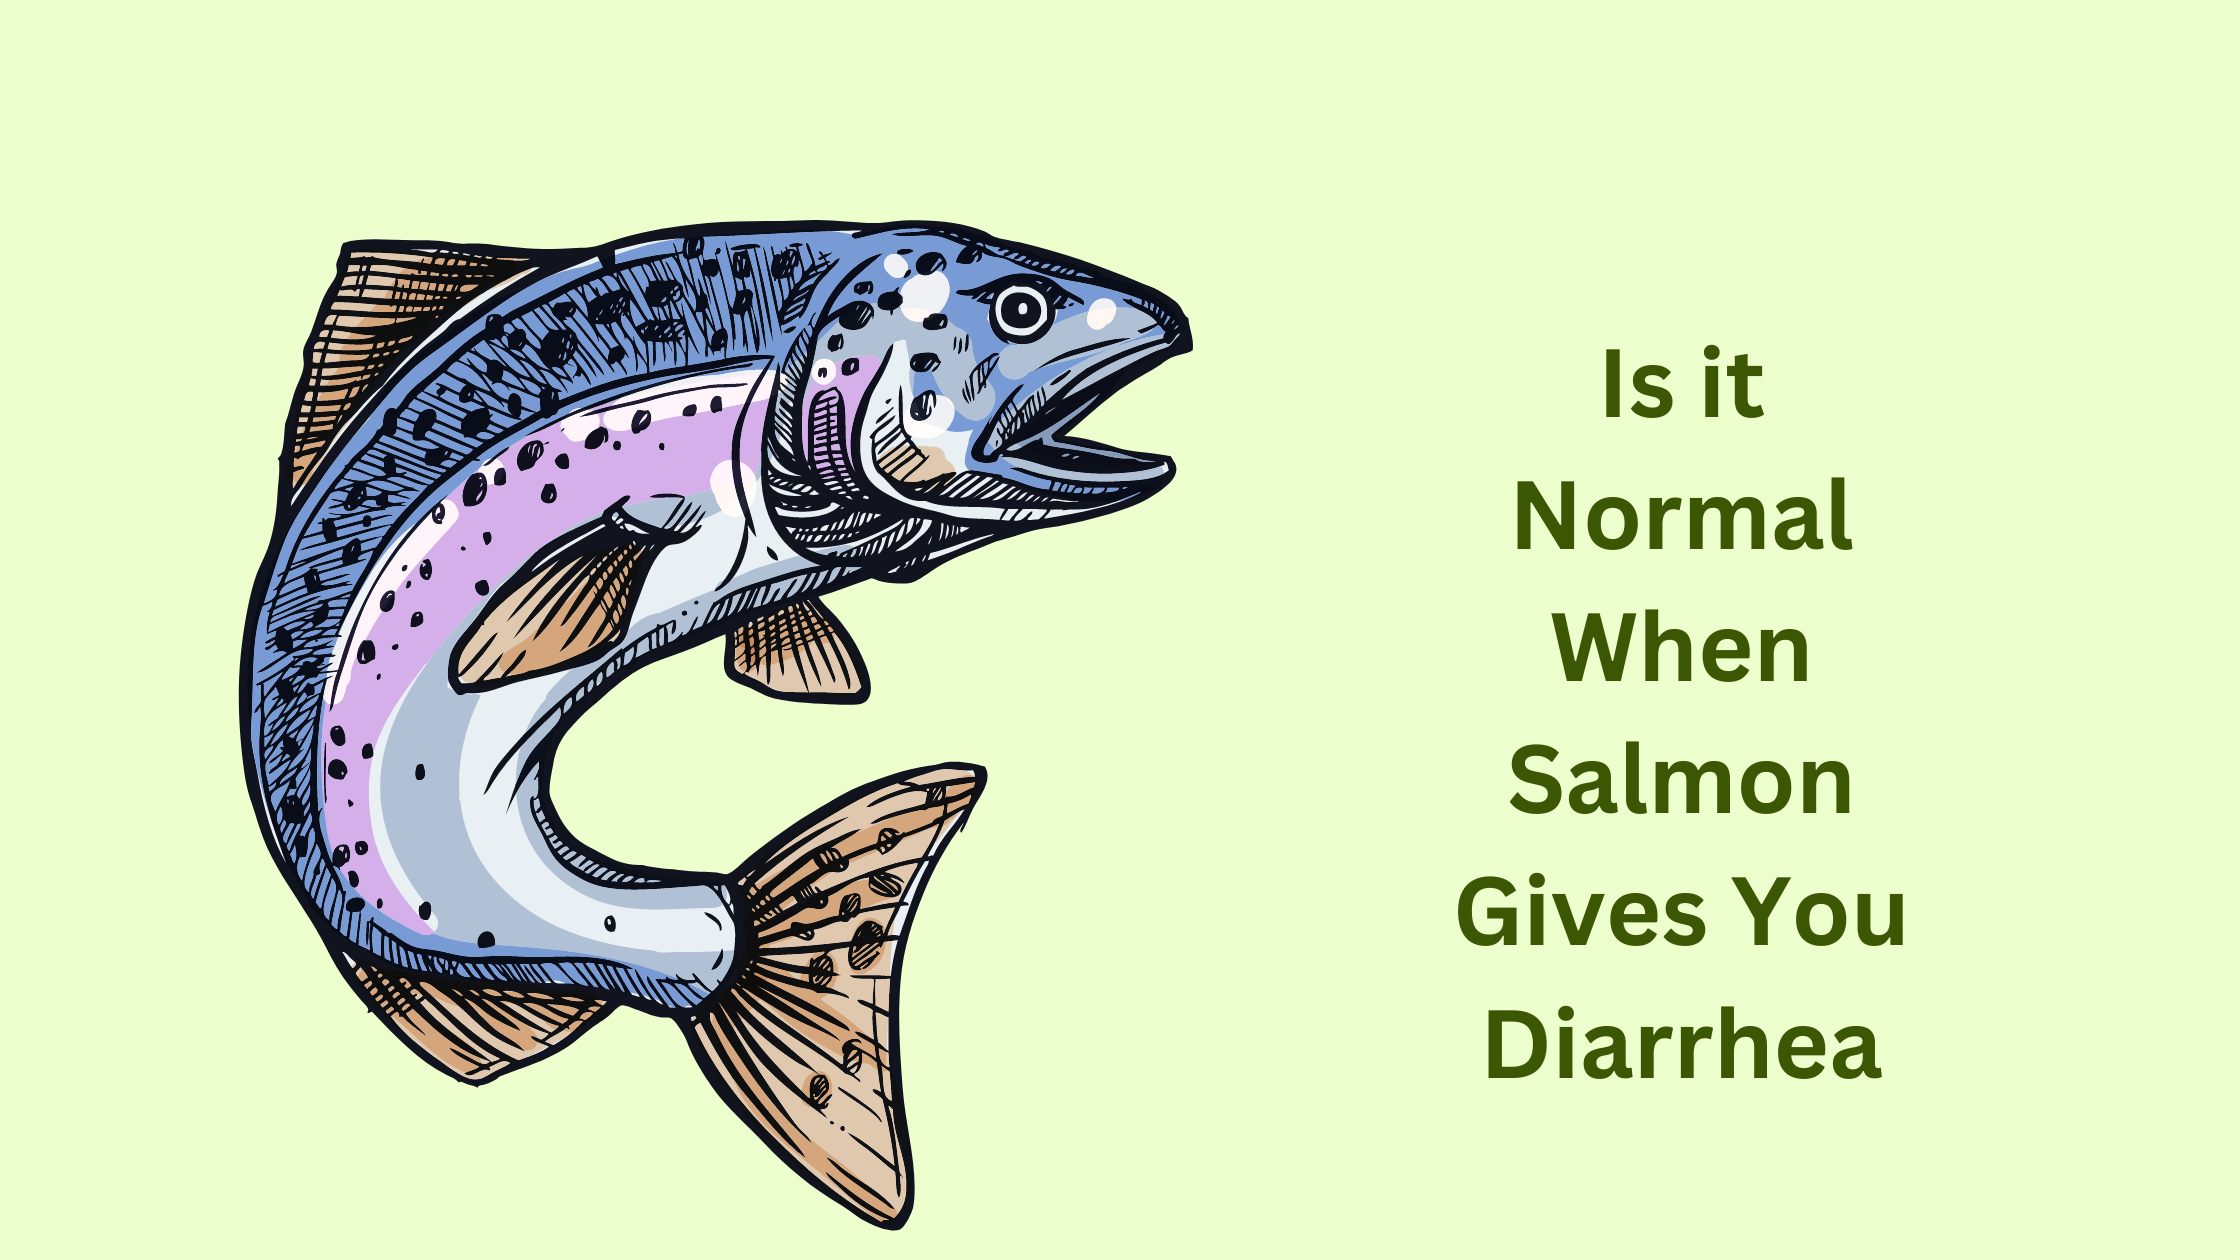 Is it Normal When Salmon Gives You Diarrhea?